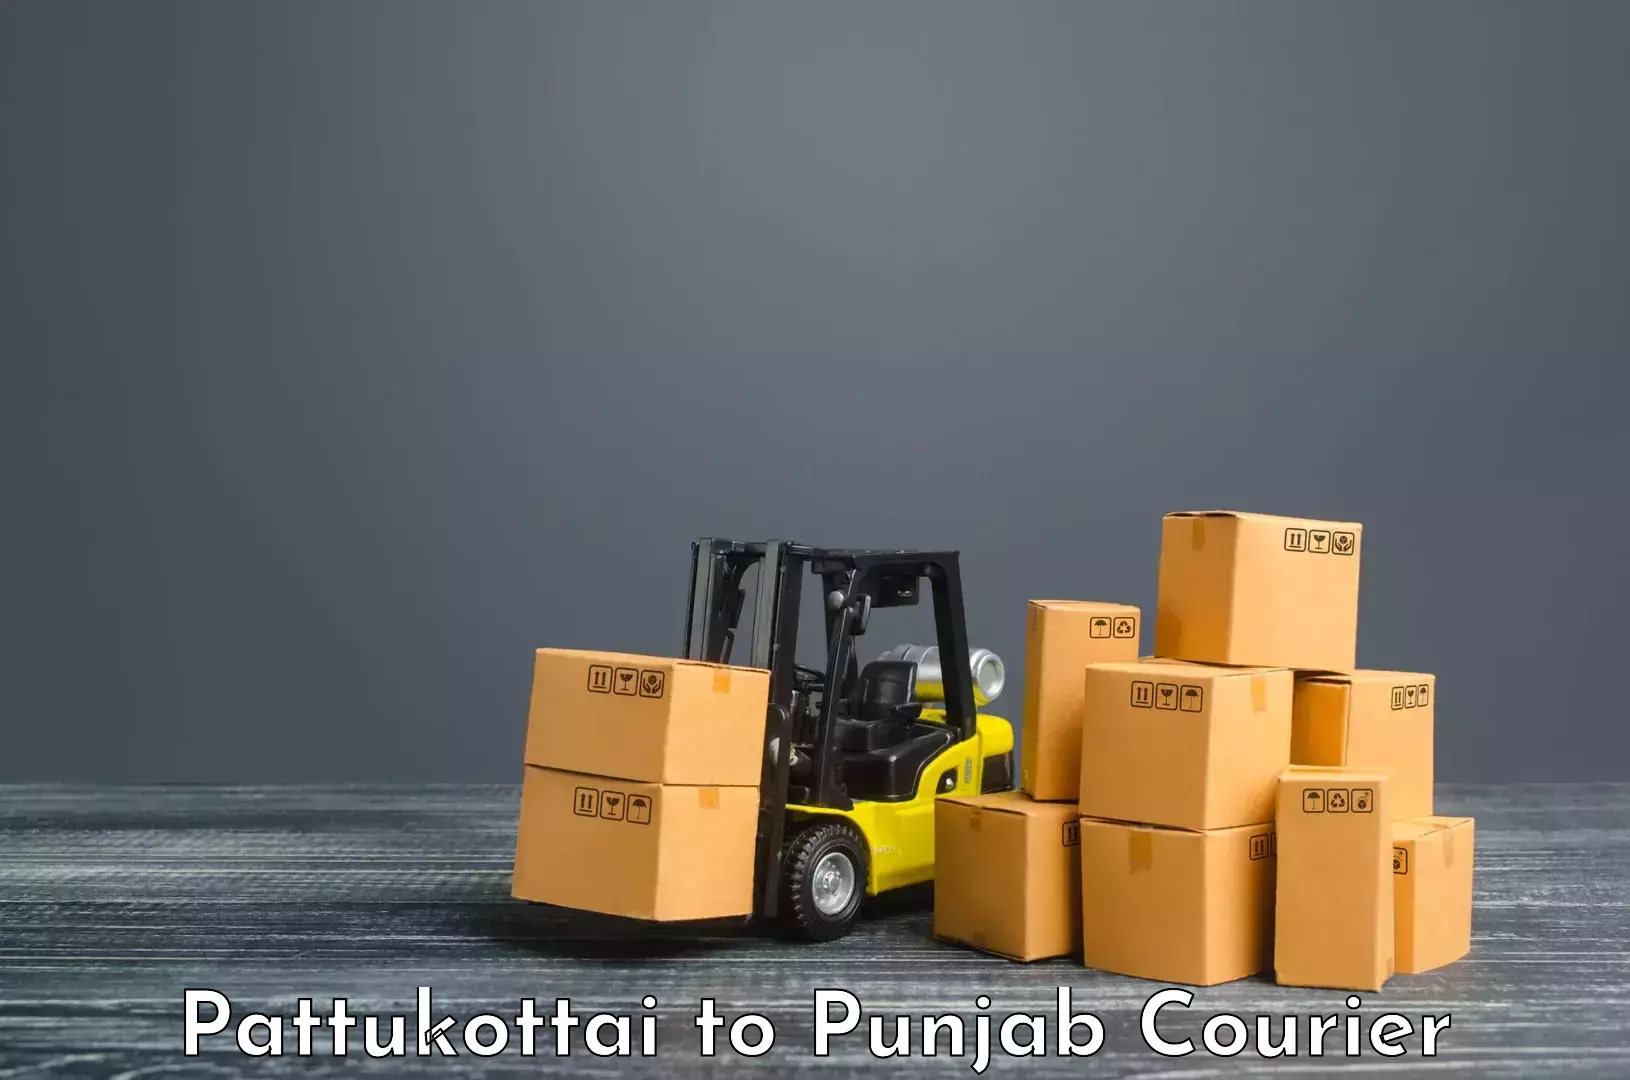 Rapid shipping services Pattukottai to Thapar Institute of Engineering and Technology Patiala